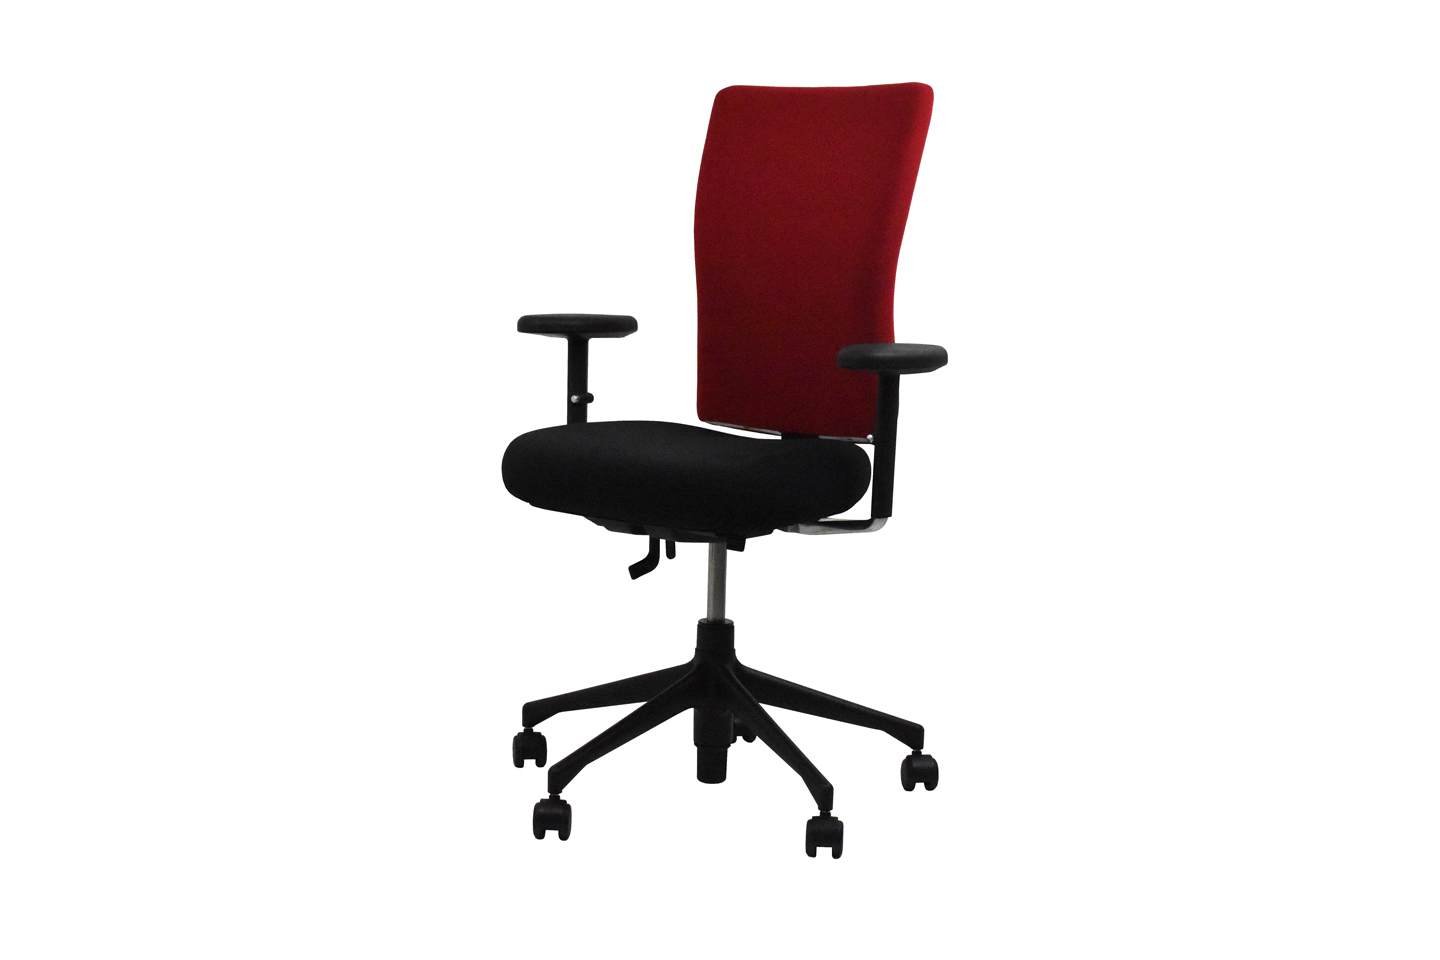 Vitra T Chair Office Swivel Chair Fabric Red Black Office Swivel Chairs Vitra Design Classics English